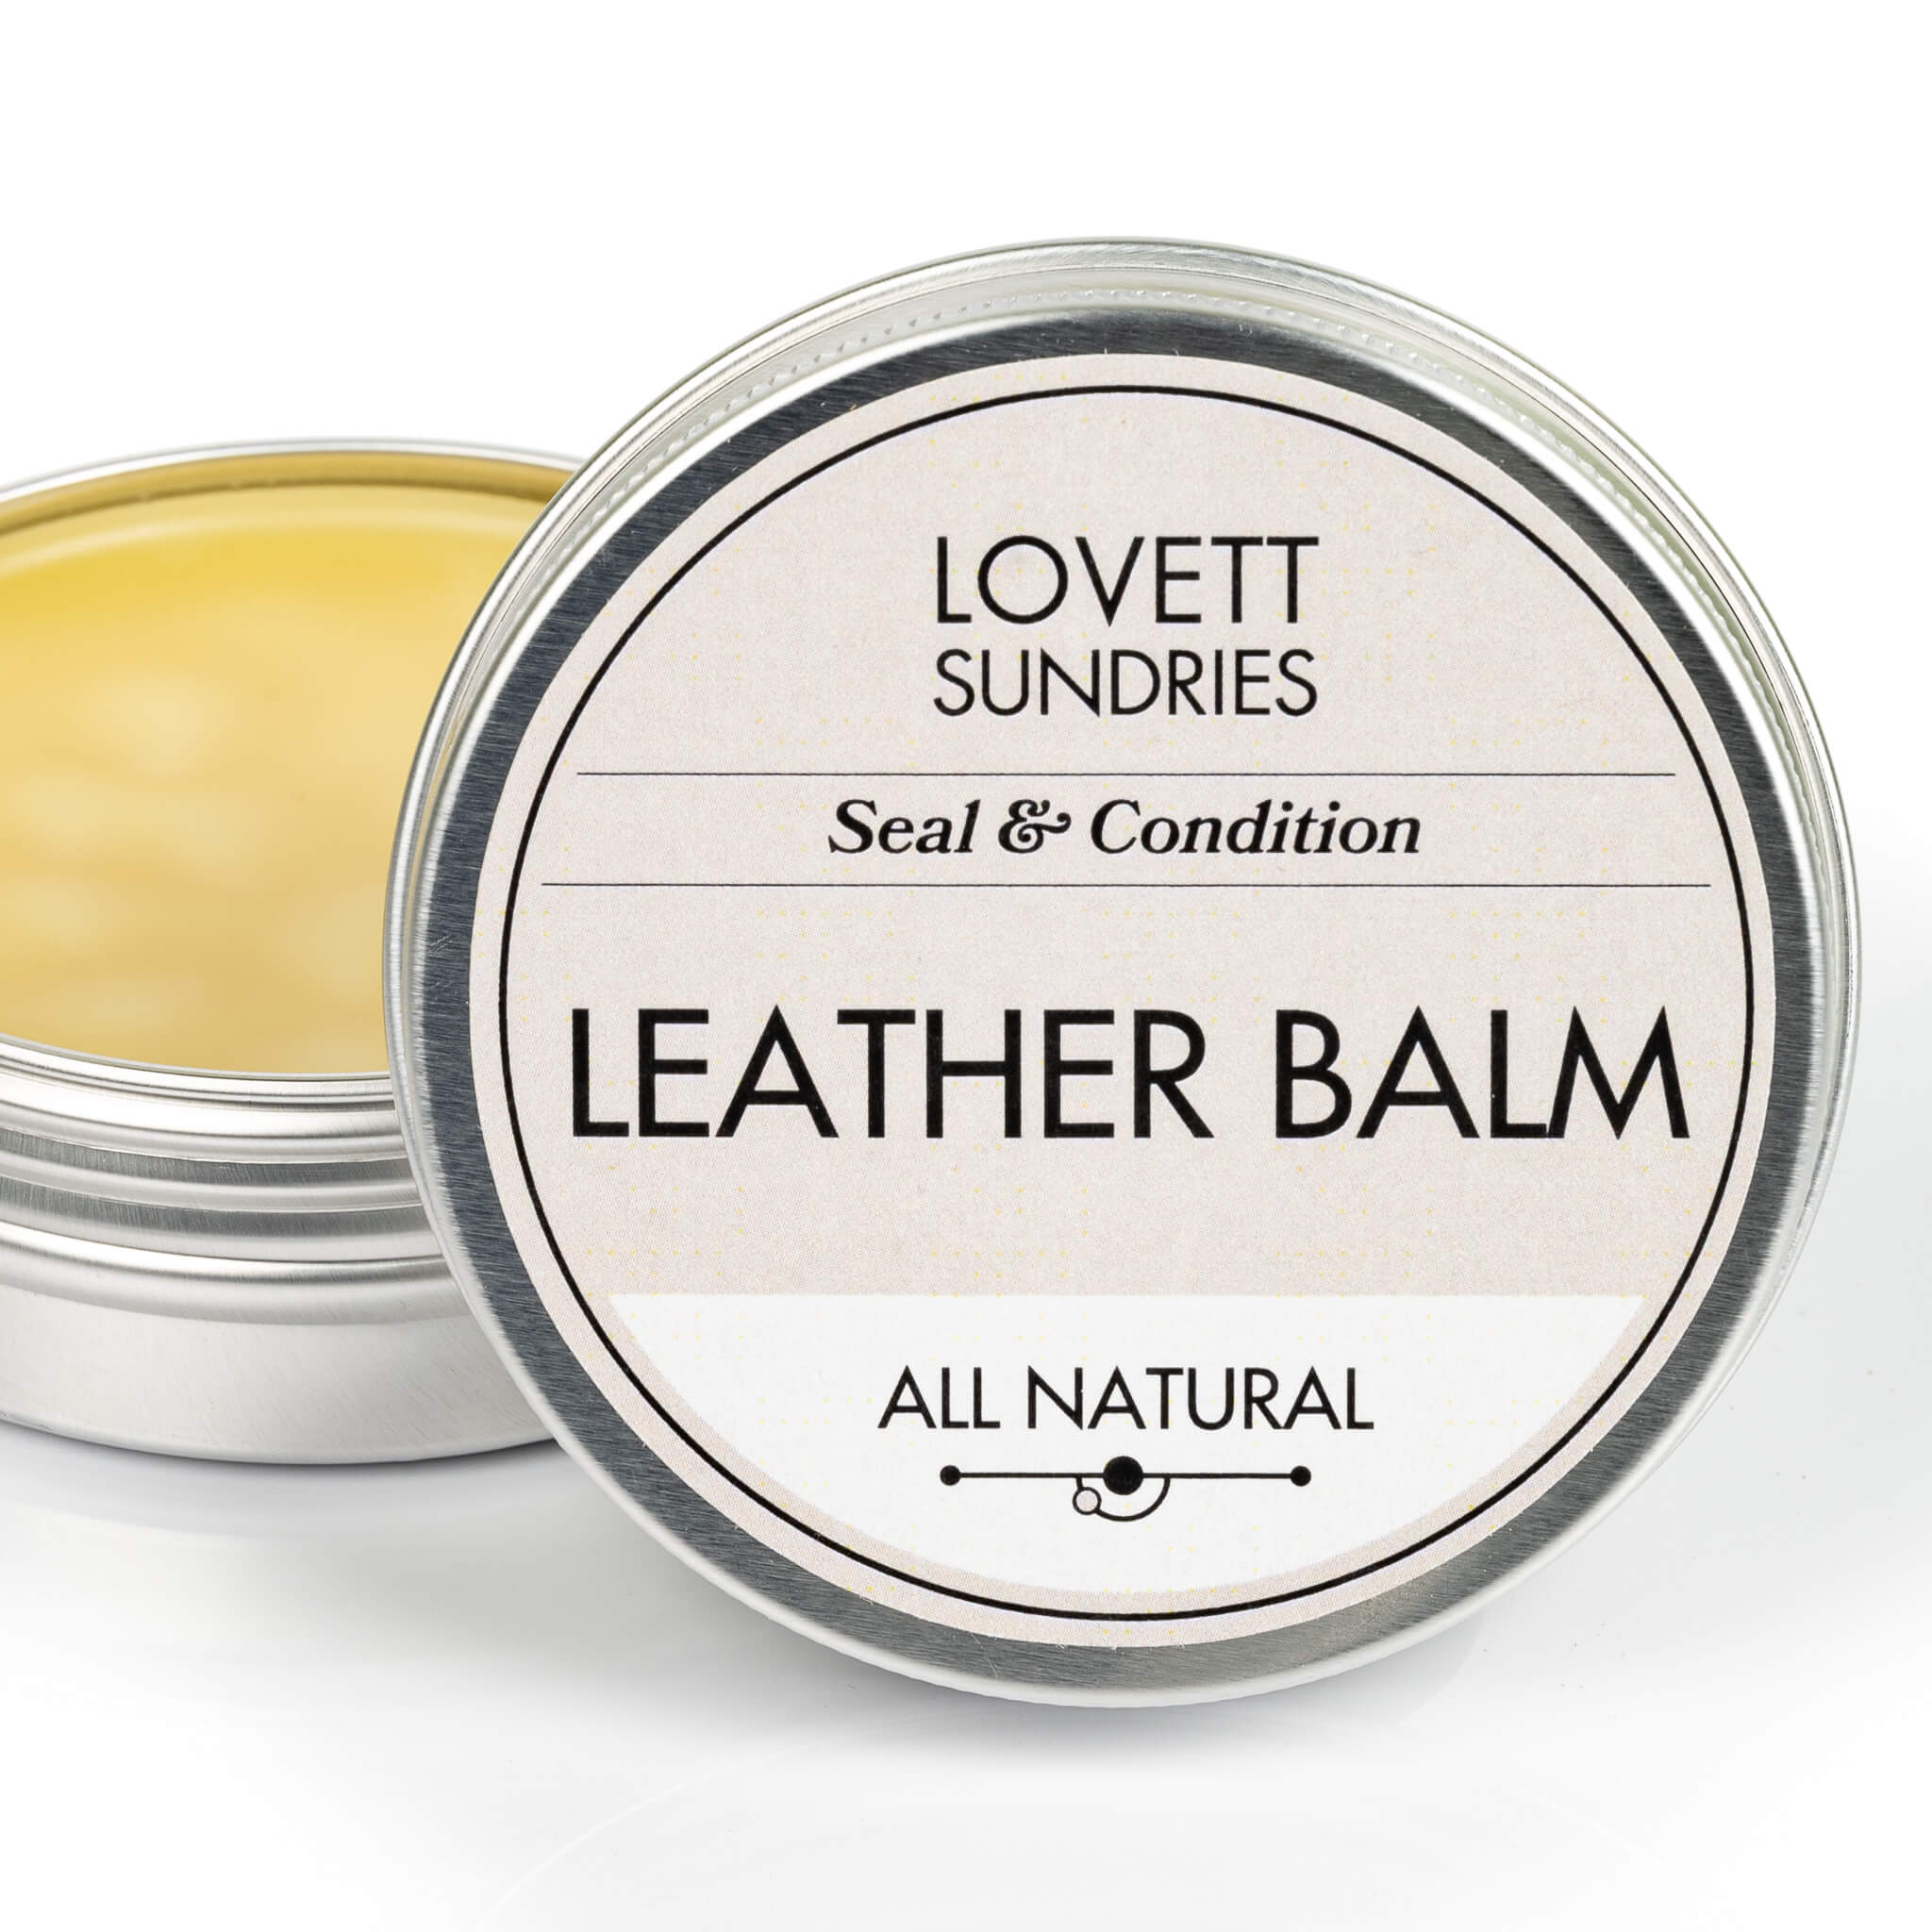 All natural leather balm that protects and conditions leather in a recyclable aluminum tin. 